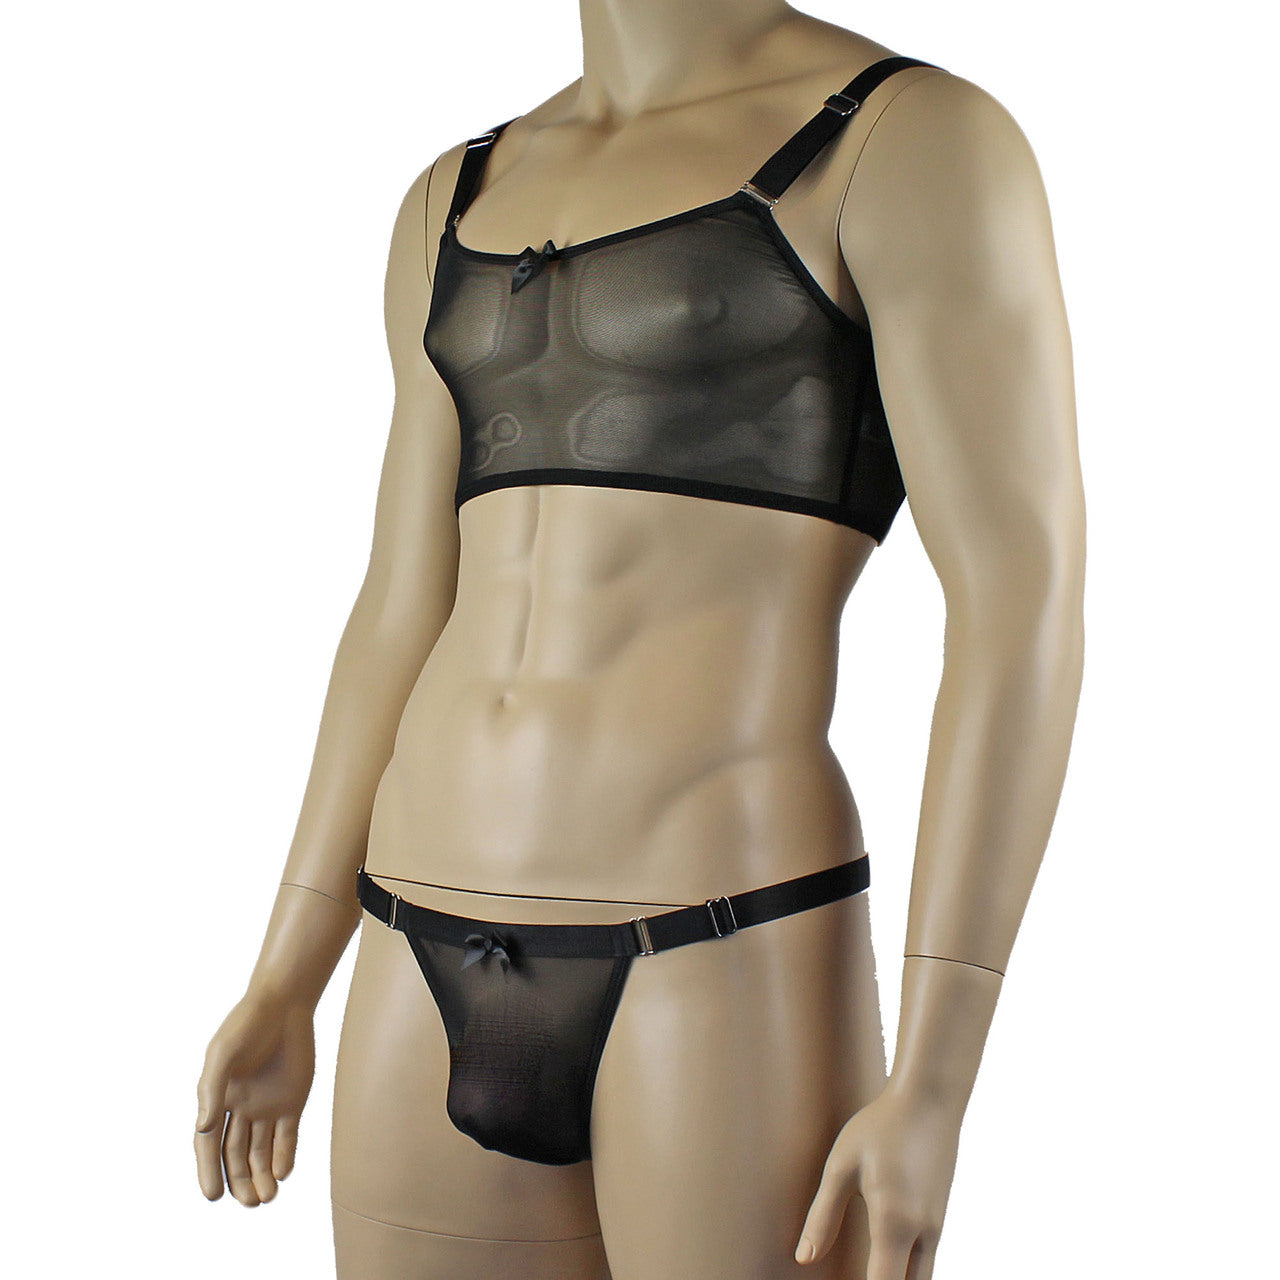 Mens Exotic Sheer Mesh Crop Bra Top Camisole & G string - Sizes up to 3XL (black plus other colours)